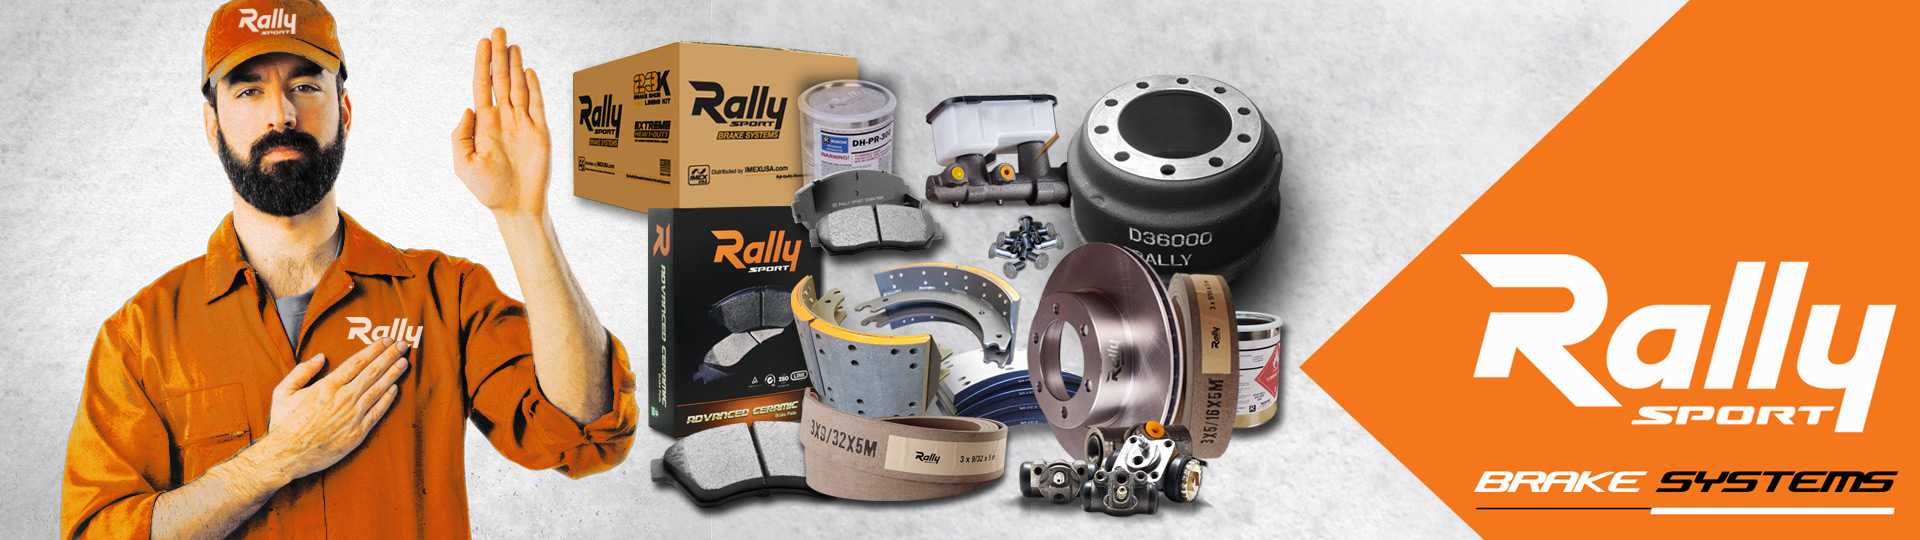 RallySport-BrakeSystems-BLOG-Banner-1920×540-Privacy-Policy-Page